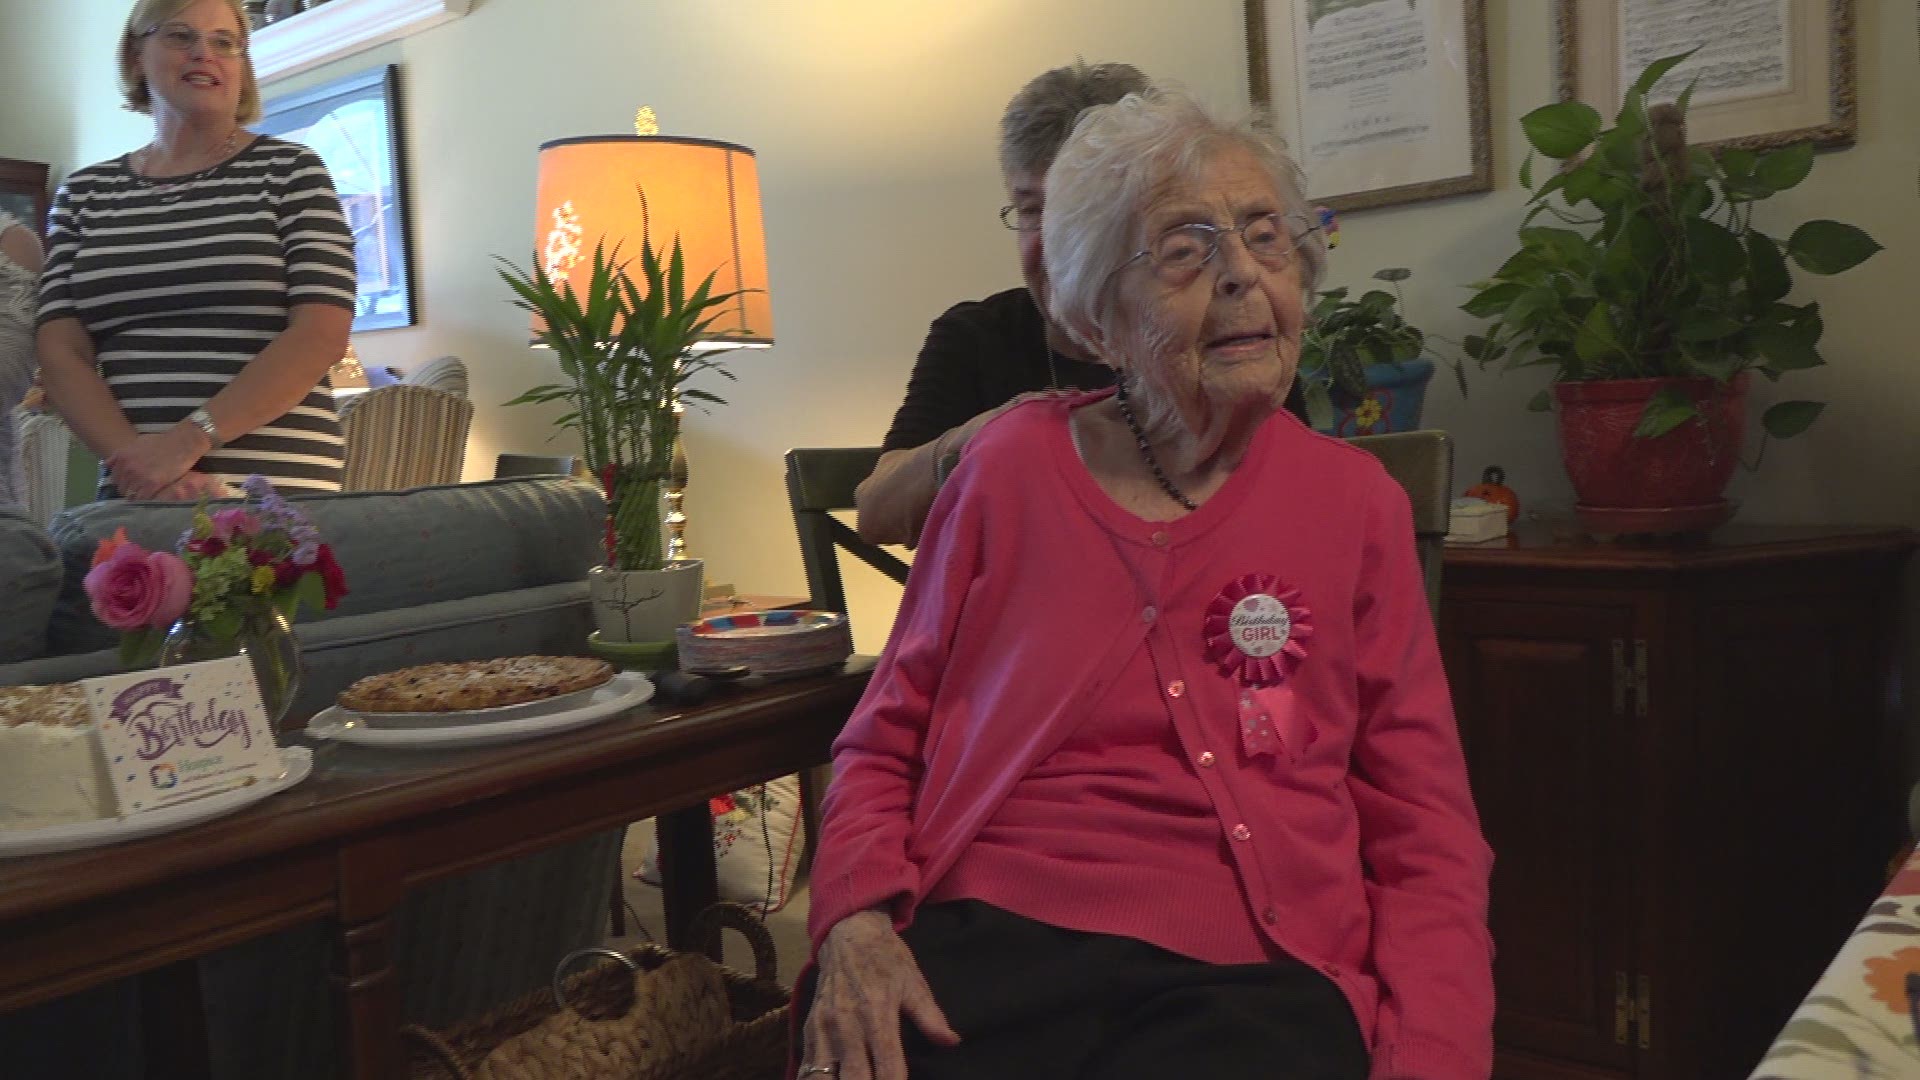 Dorothy Keller is celebrating her 111th birthday. So what's her secret to living a long life? "I'm living because I never ate  cheese or butter. I don't care for butter. It makes me ill. And cheese is almost as bad," said Keller.